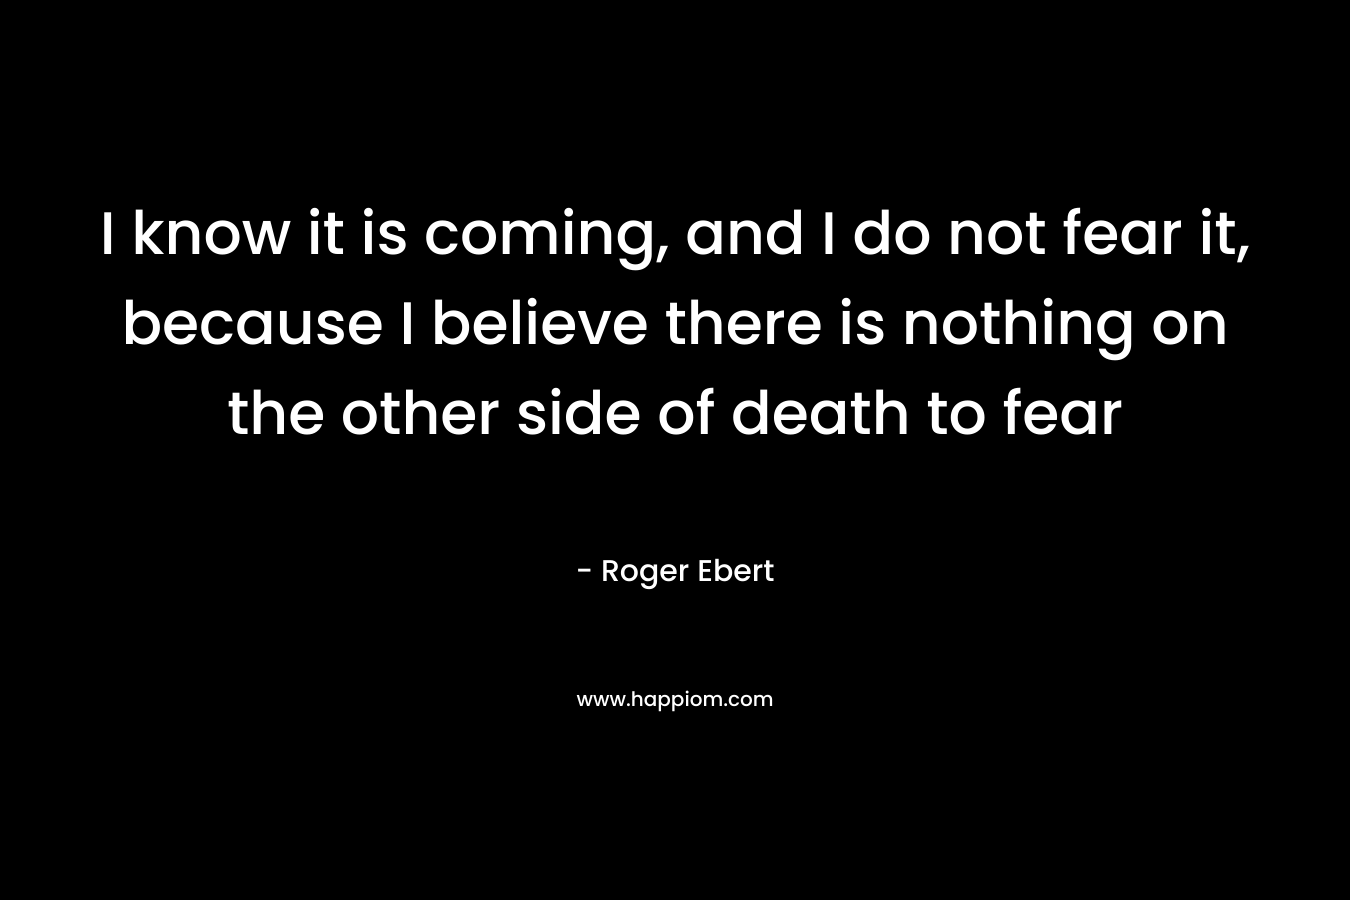 I know it is coming, and I do not fear it, because I believe there is nothing on the other side of death to fear – Roger Ebert